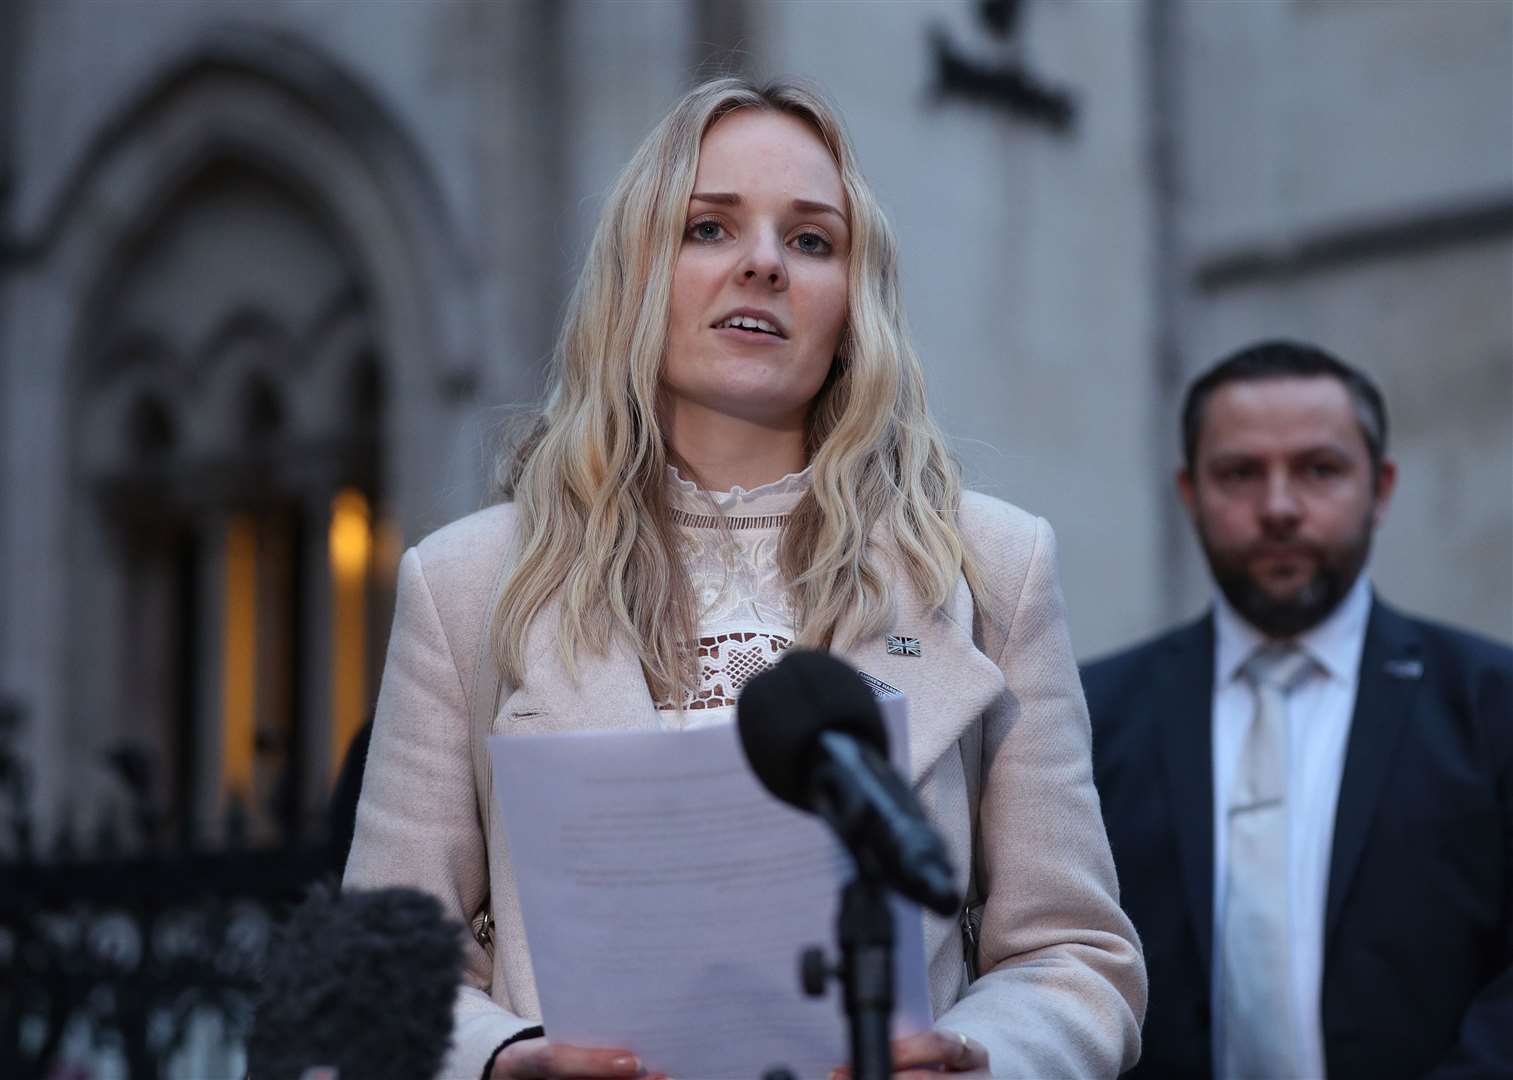 Lissie Harper, widow of Pc Andrew Harper, speaking to the media outside the Royal Courts of Justice in central London (Yui Mok/PA)